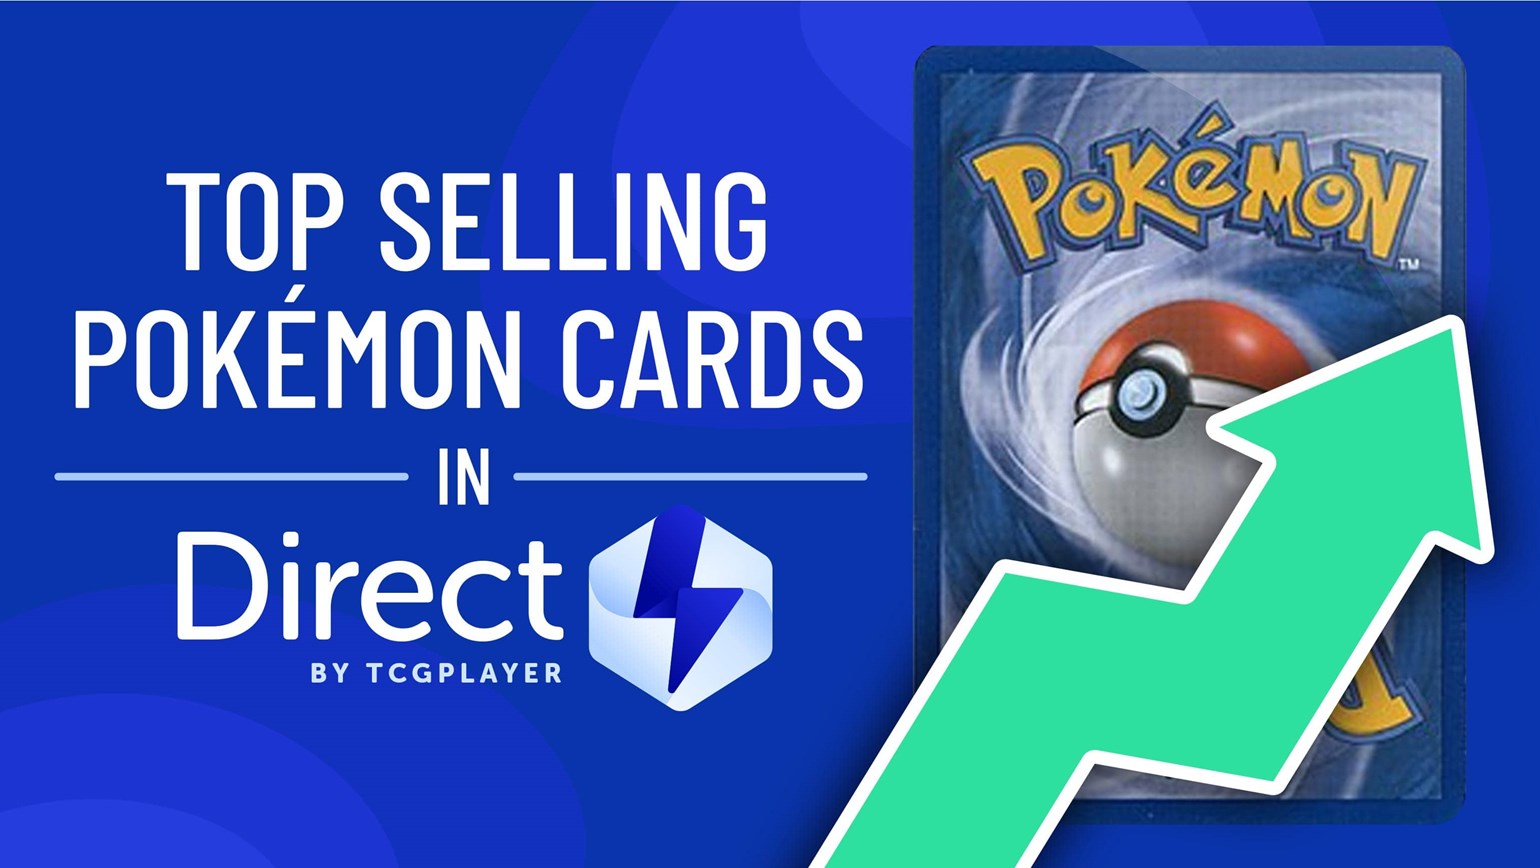 May Top Selling Pokémon Cards in Direct by TCGplayer